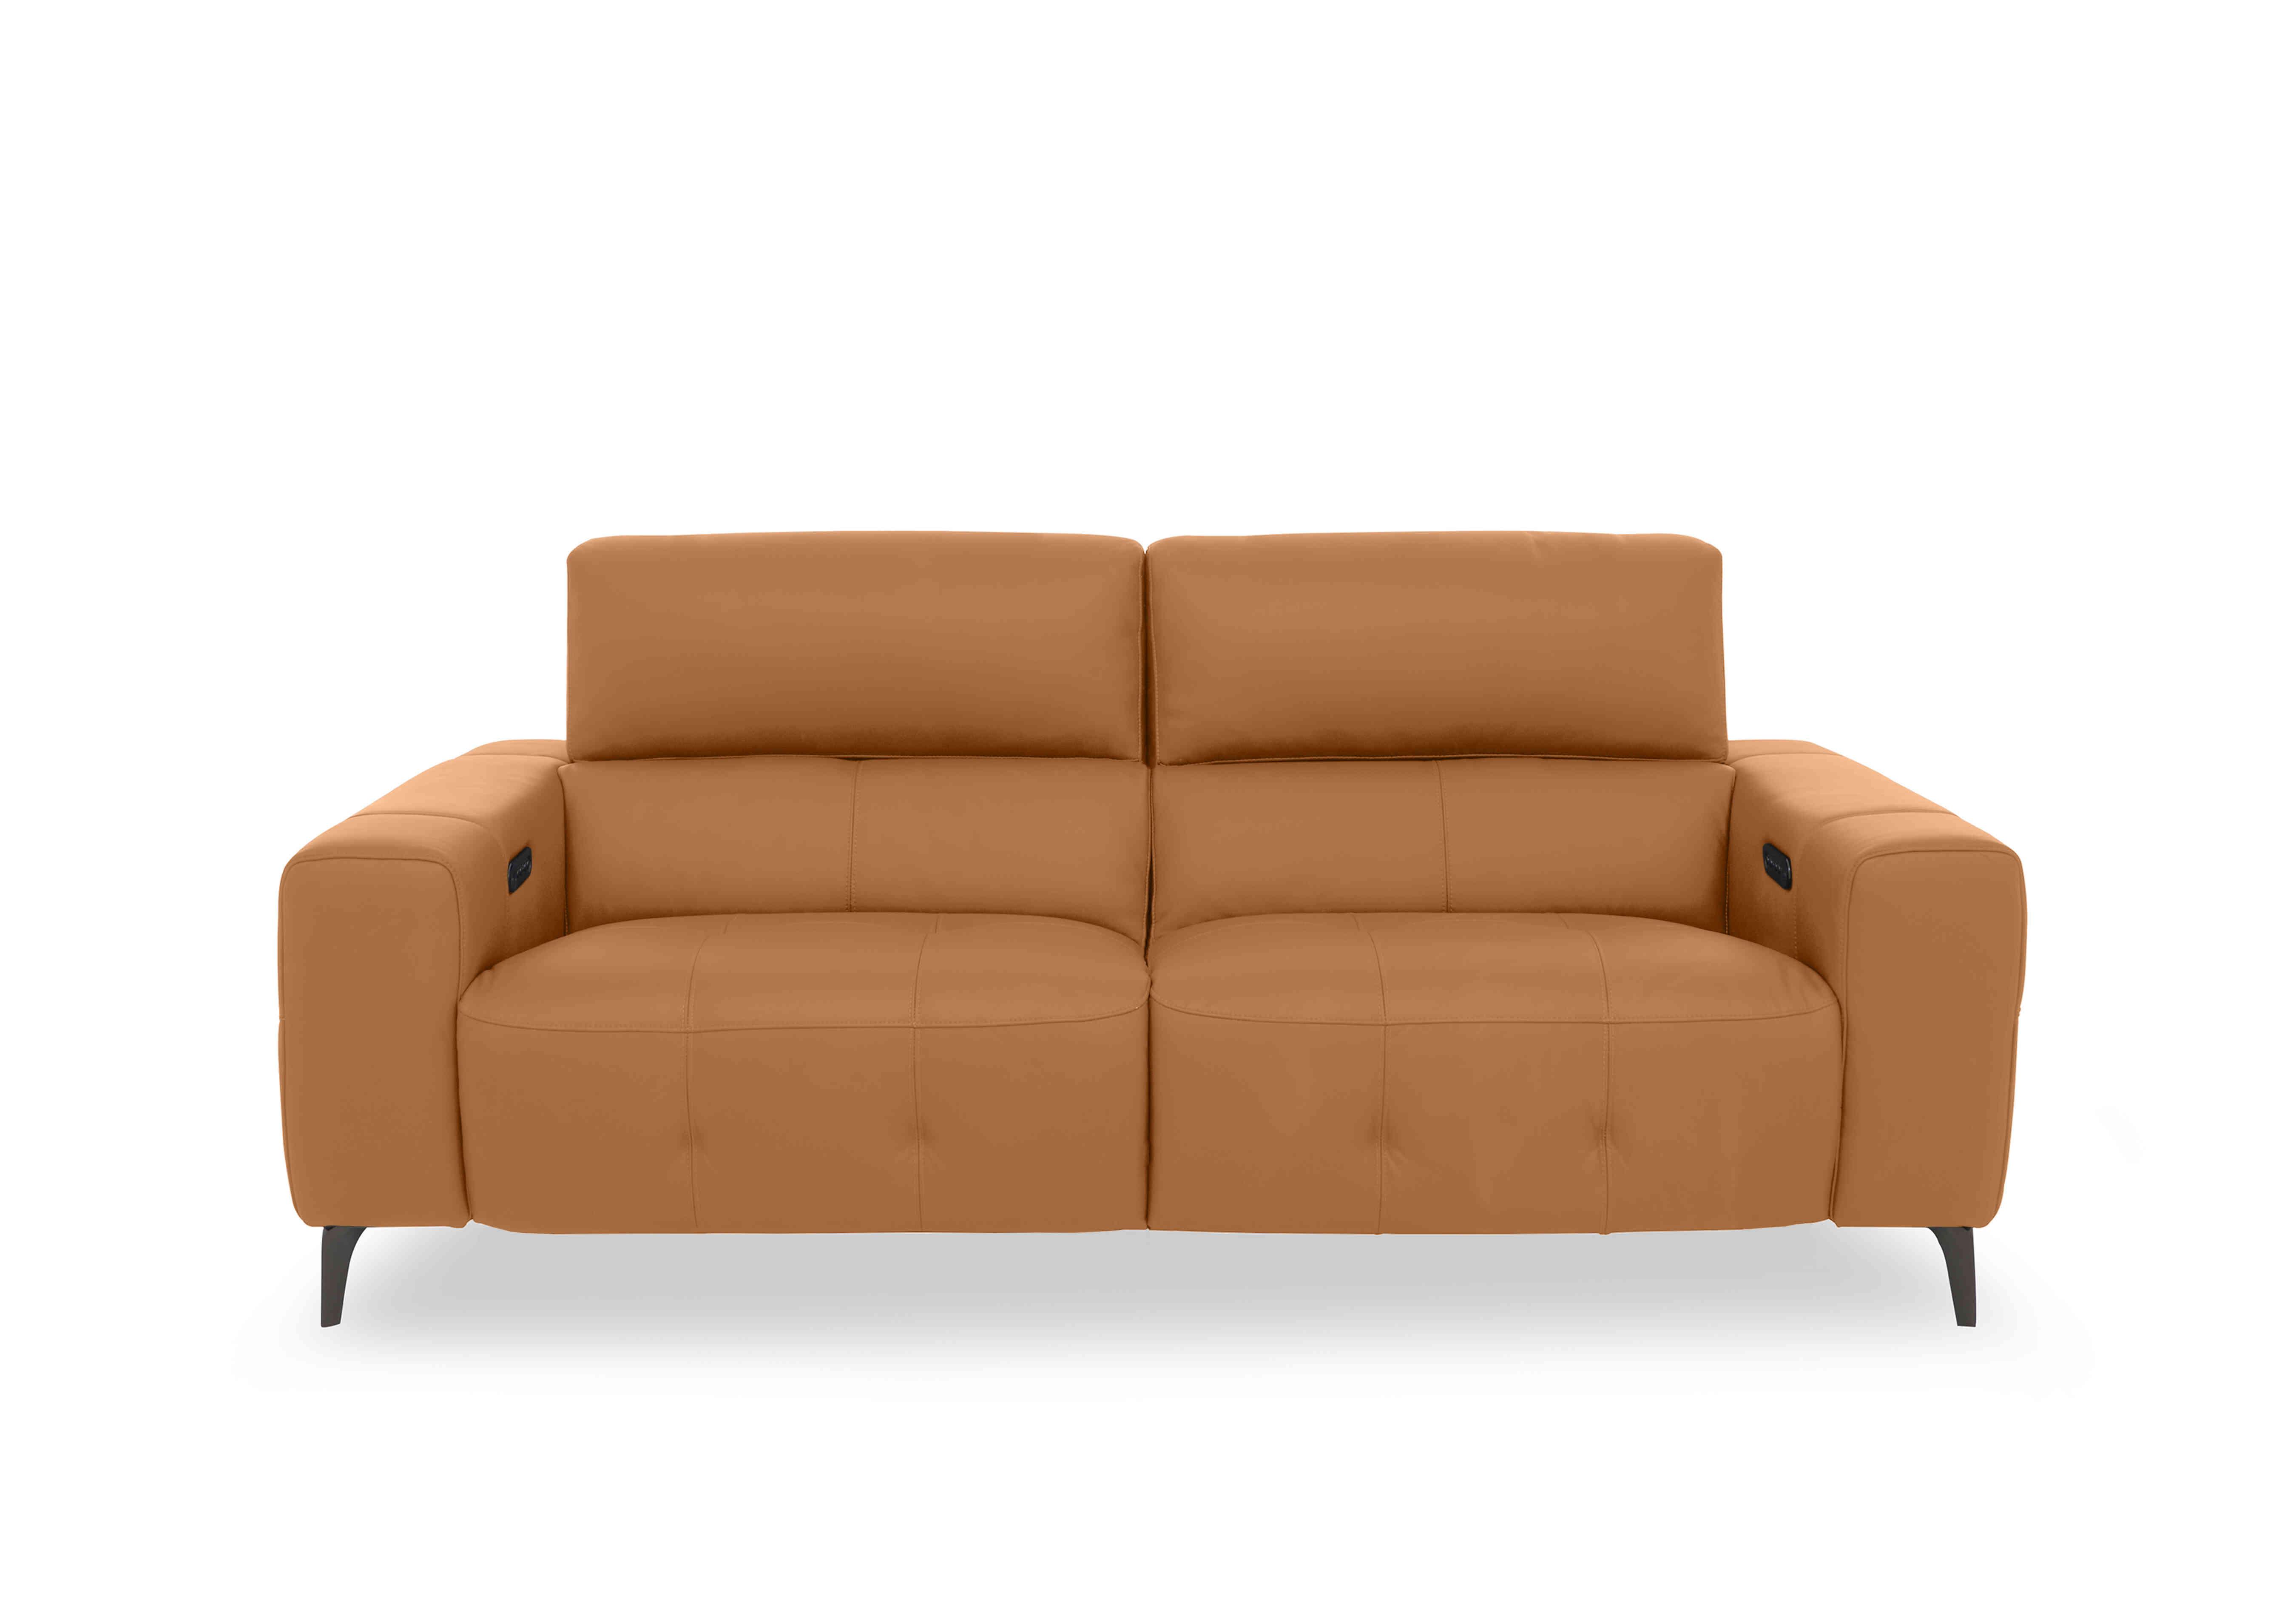 New York 3 Seater Leather Sofa in Bv-335e Honey Yellow on Furniture Village